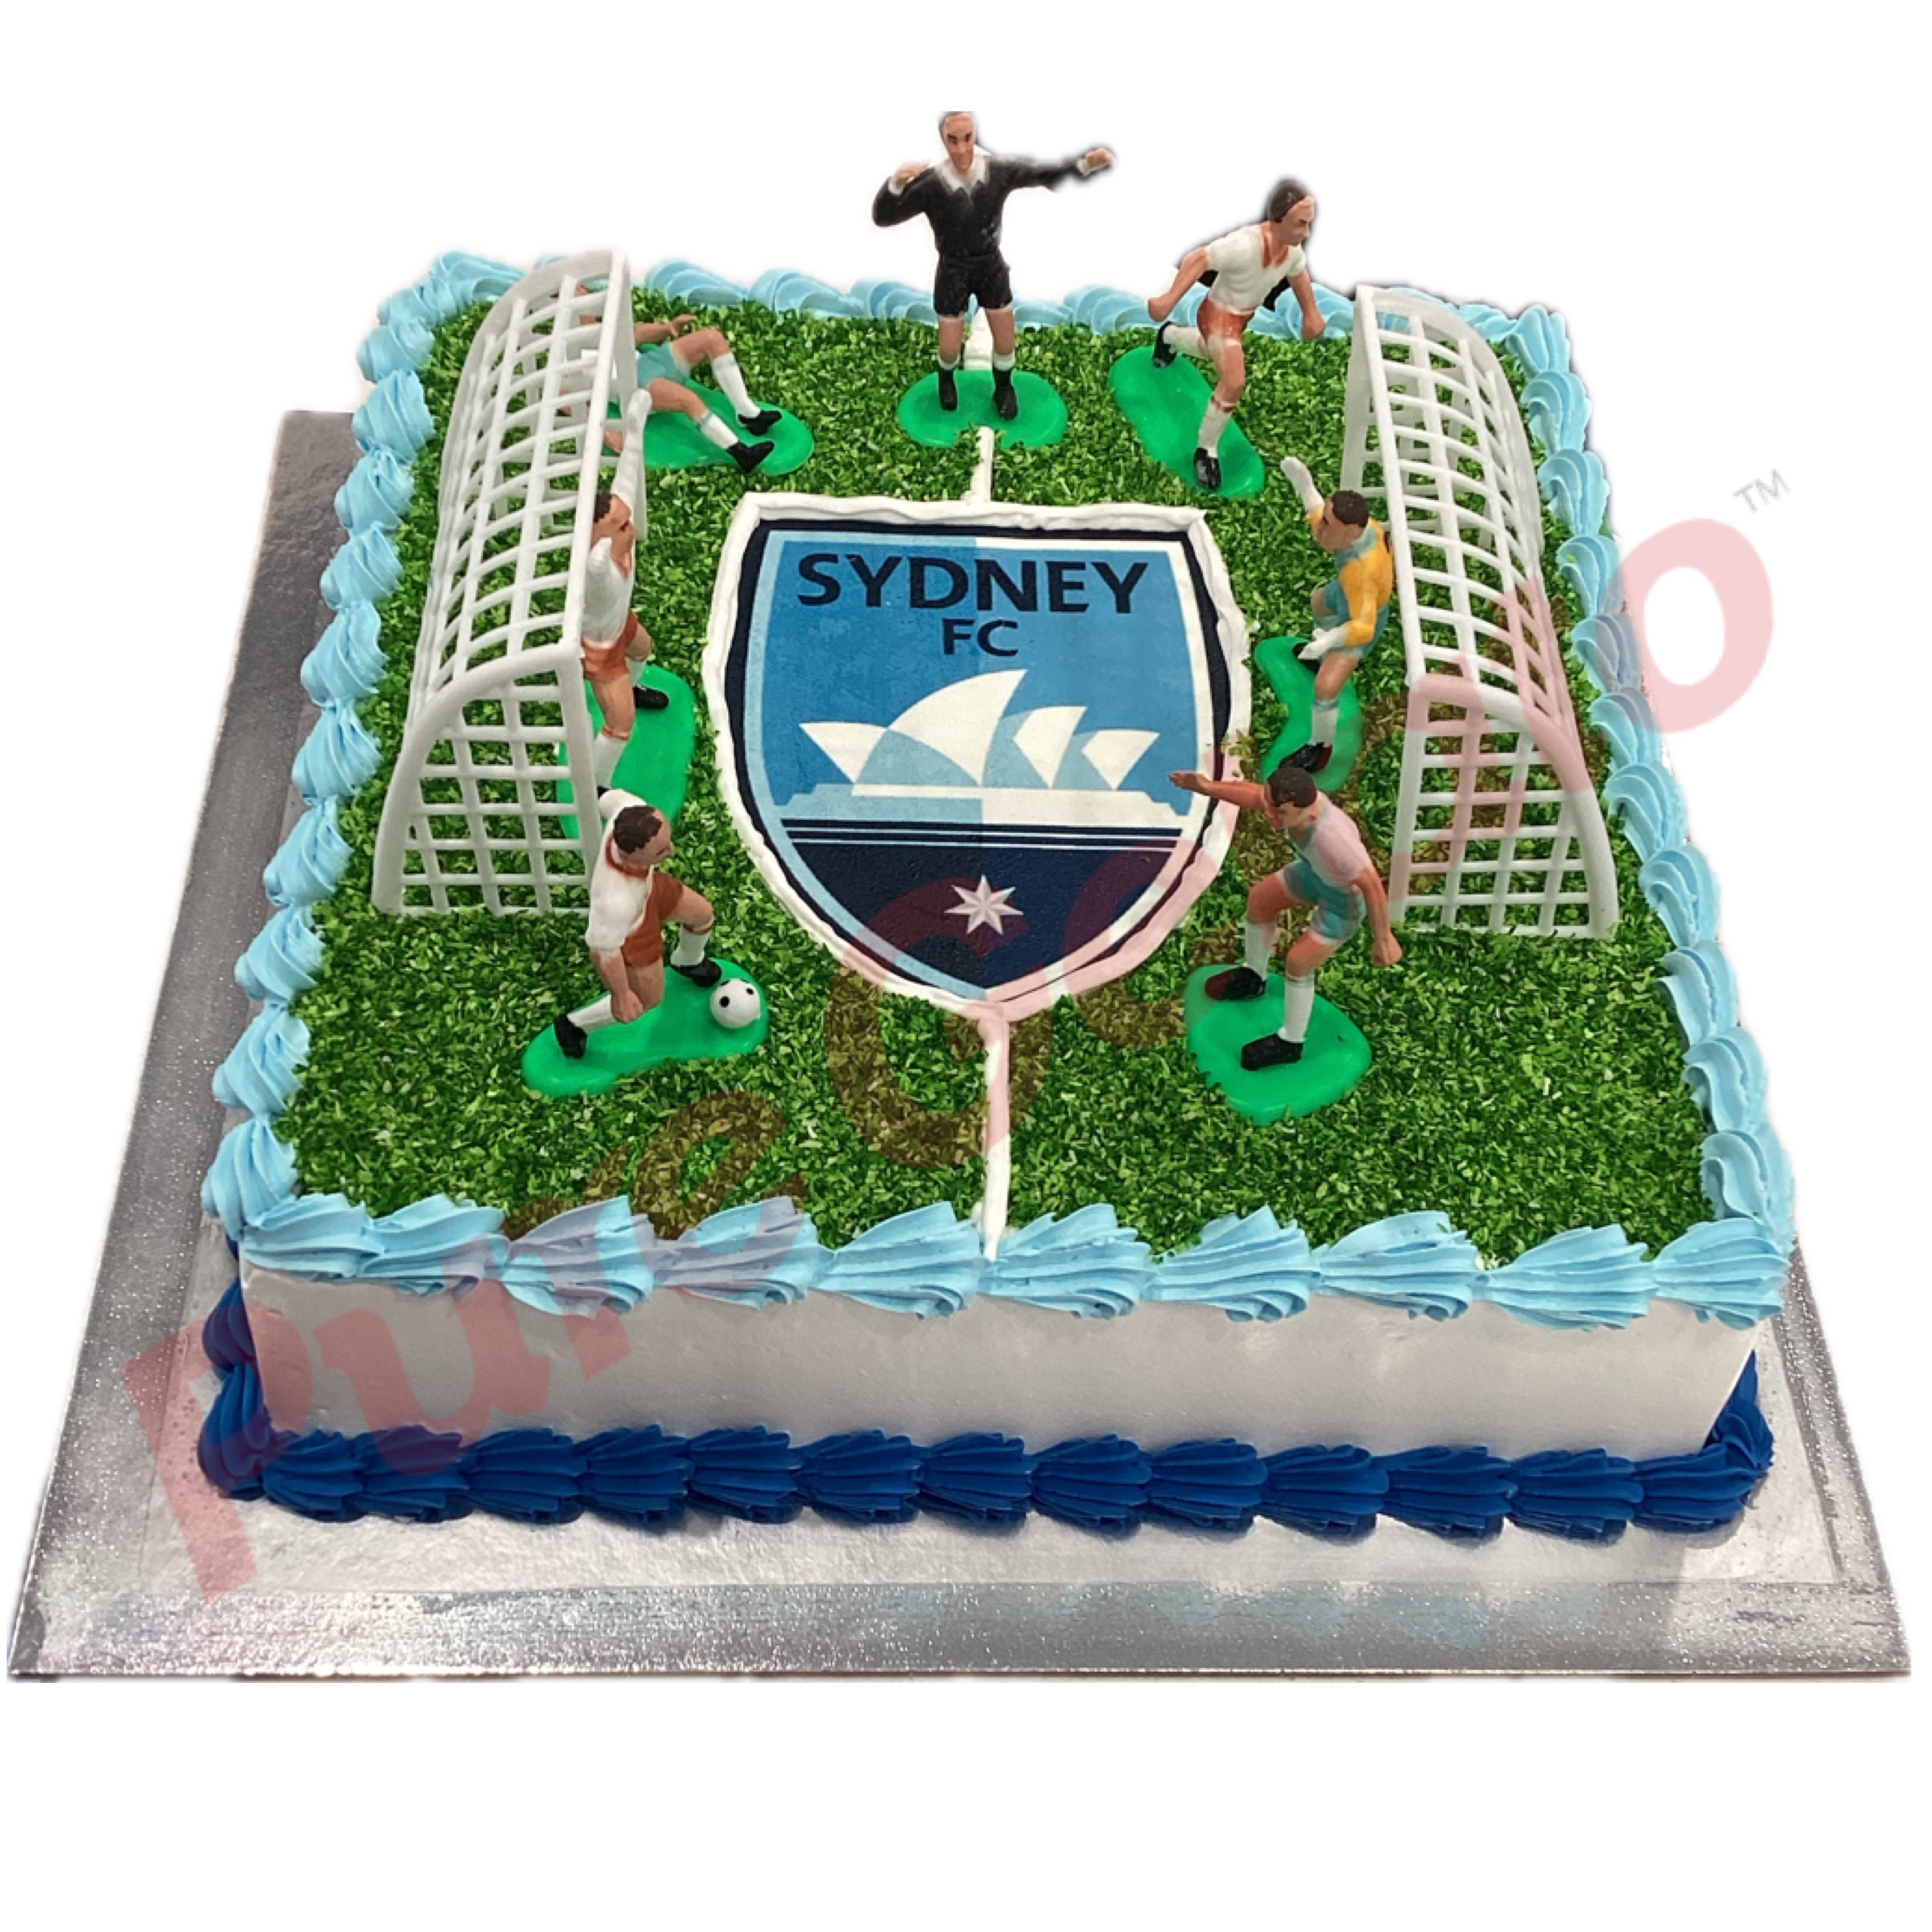 Sports Field Cakes